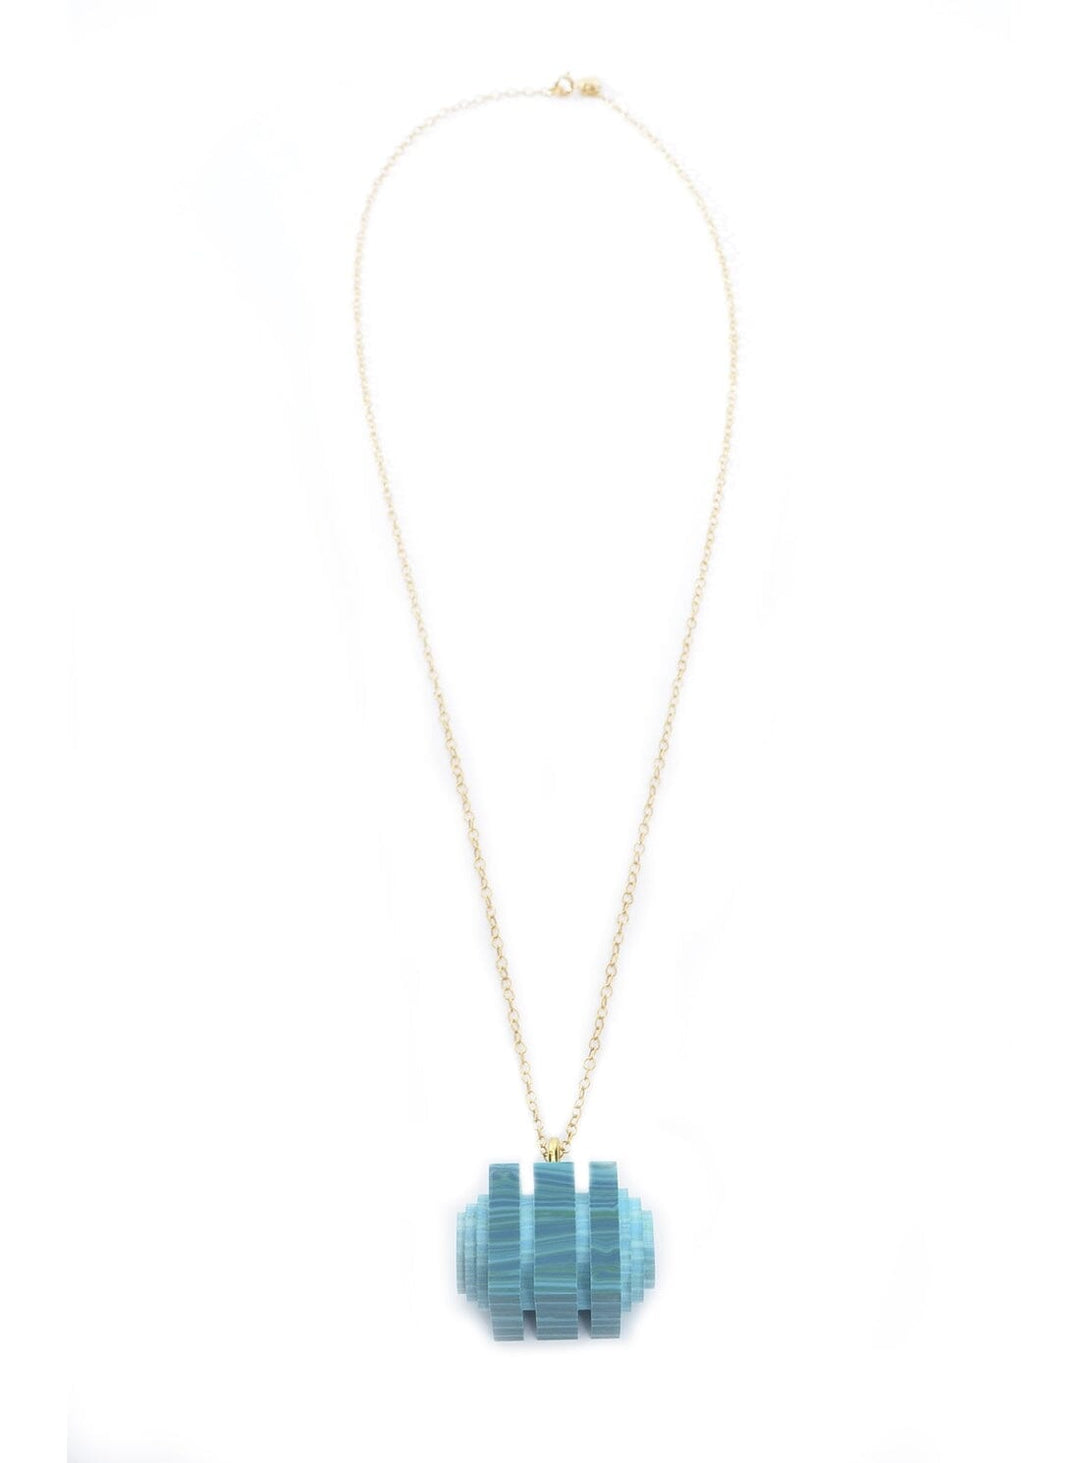 Green Matrix Tiered Cube Pendant Necklaces YBDFinds 